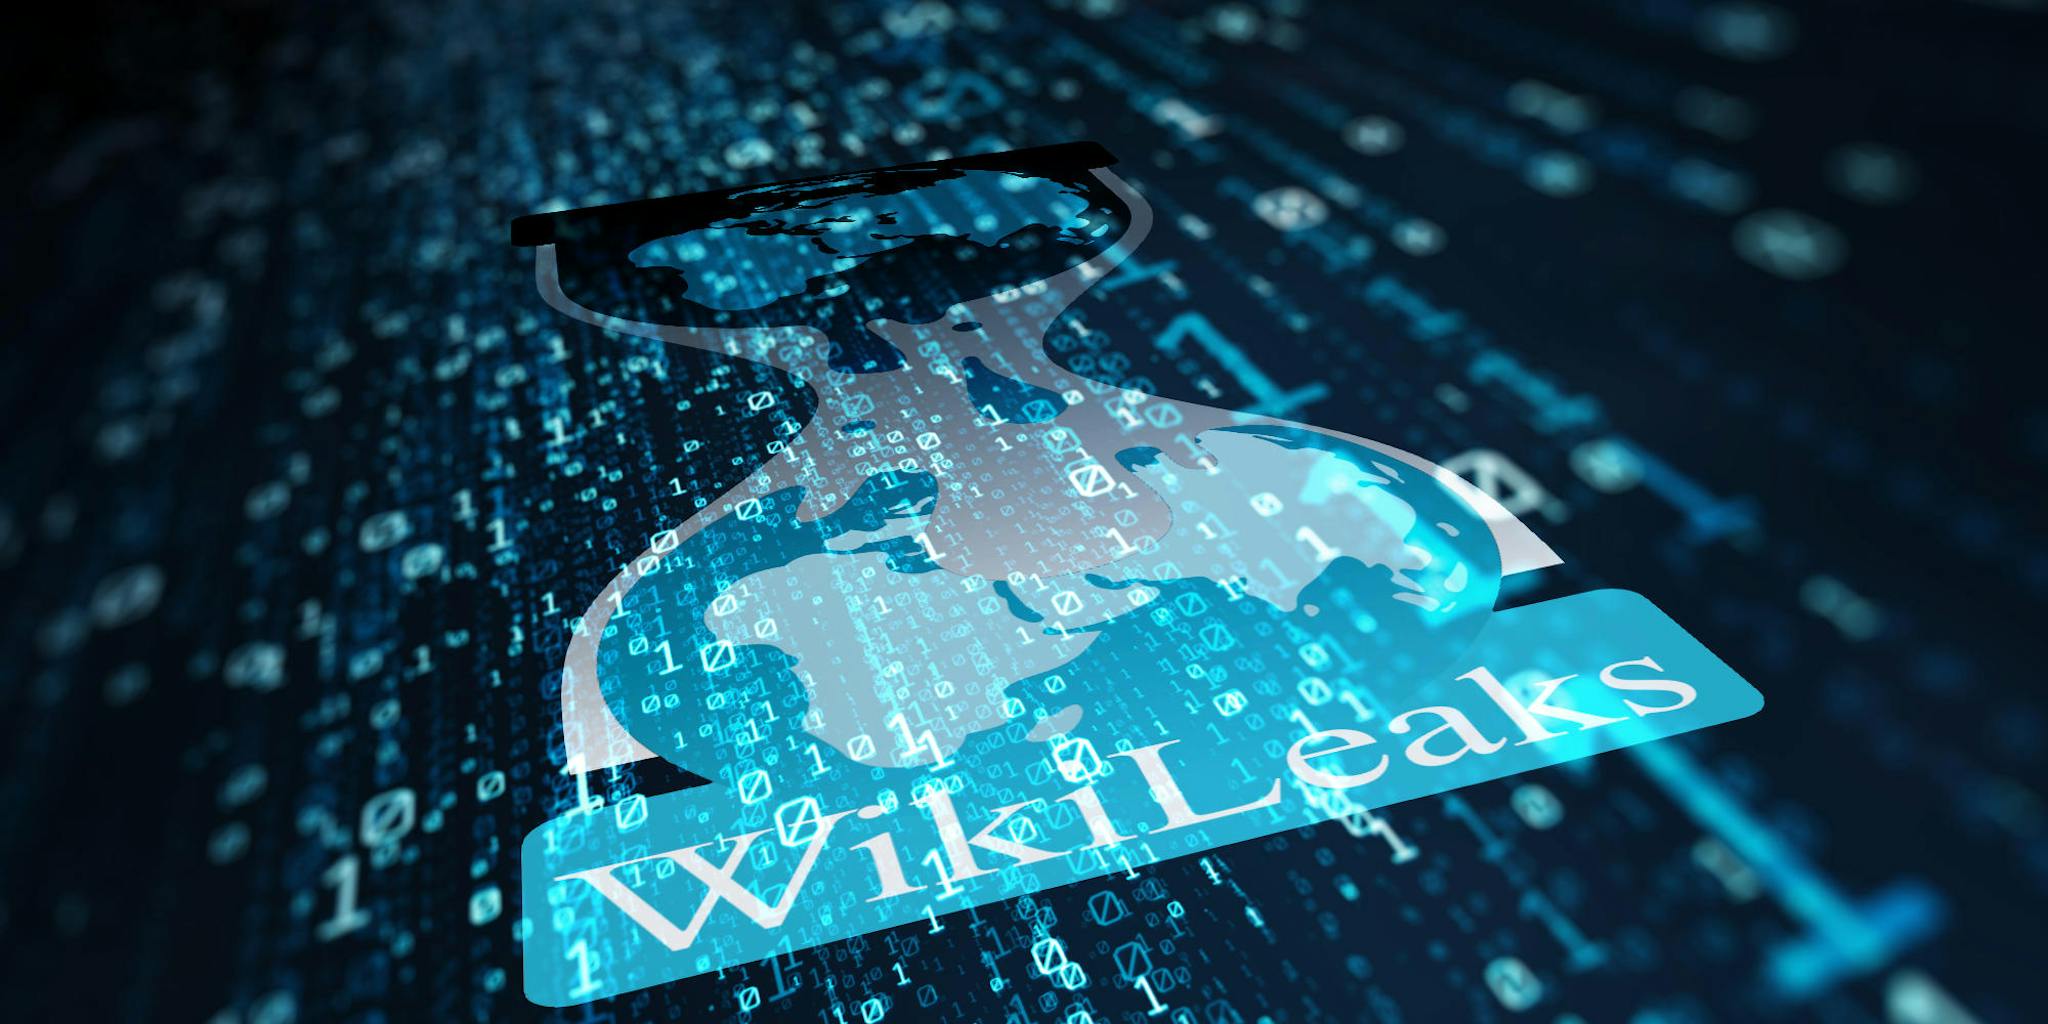 Submitting docs to WikiLeaks is seemingly impossible amid uptick in hacktivism against Russia